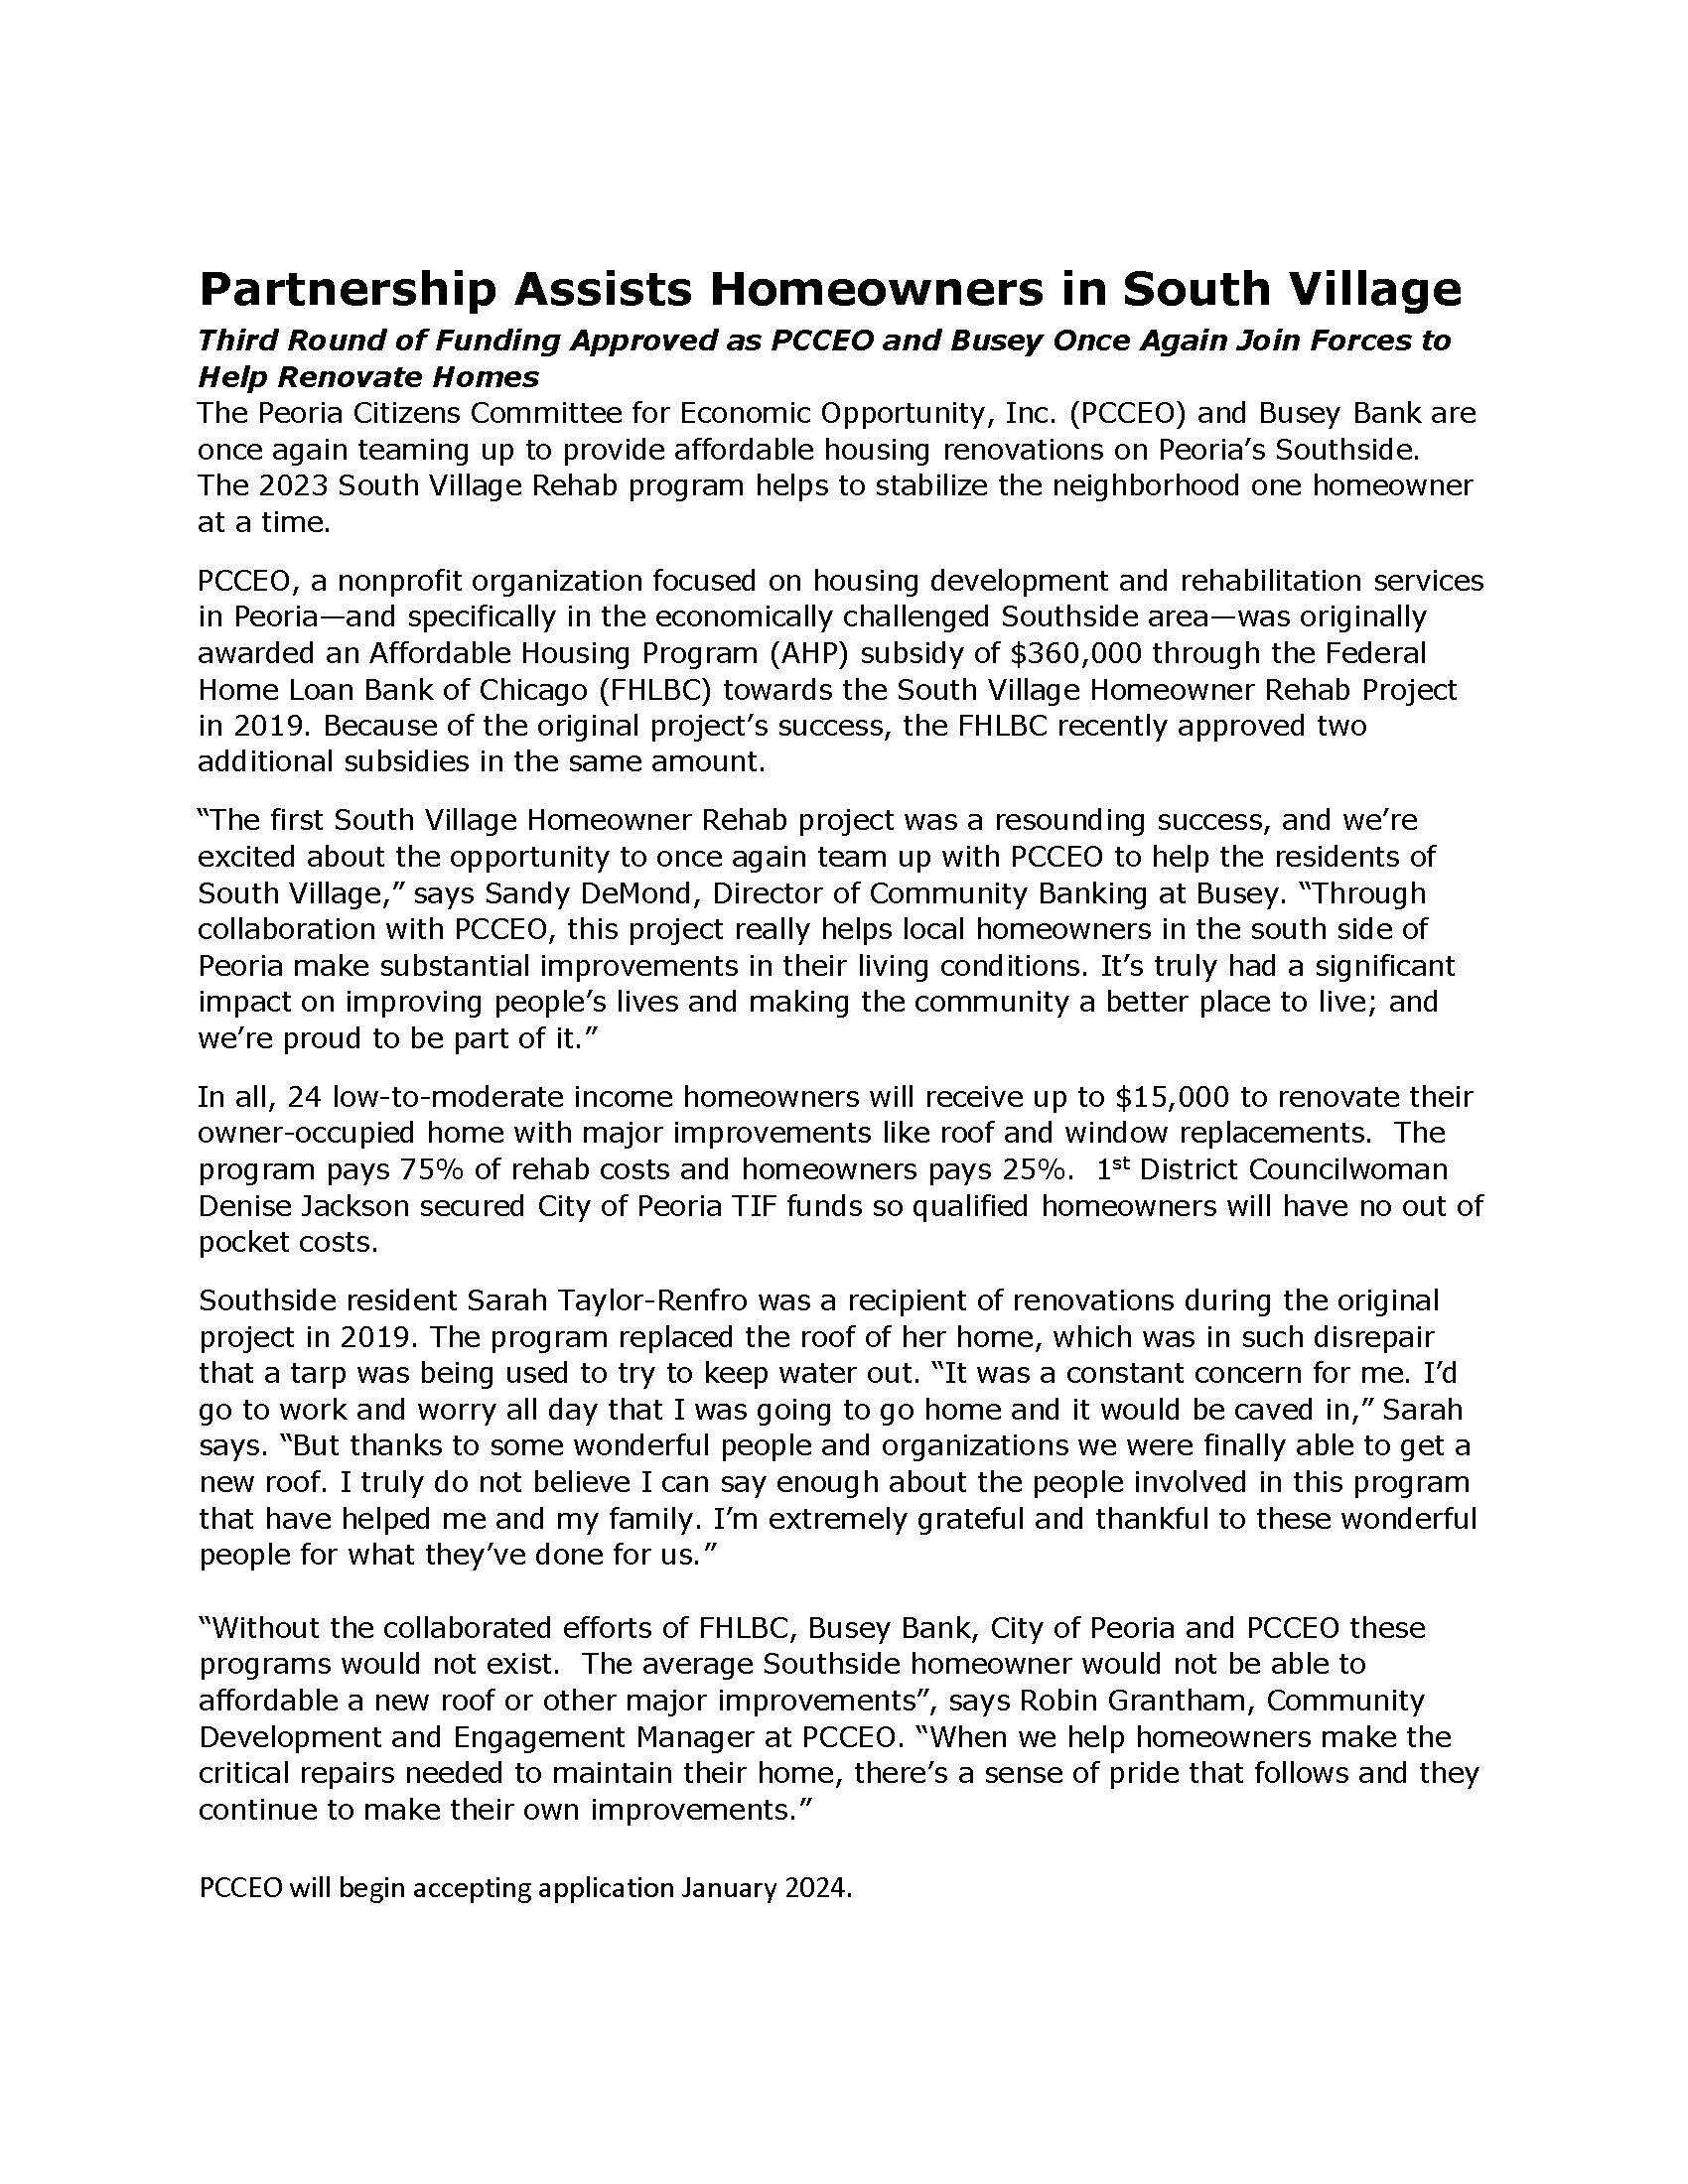 South Village Rehab Project Press Release 11/8/23